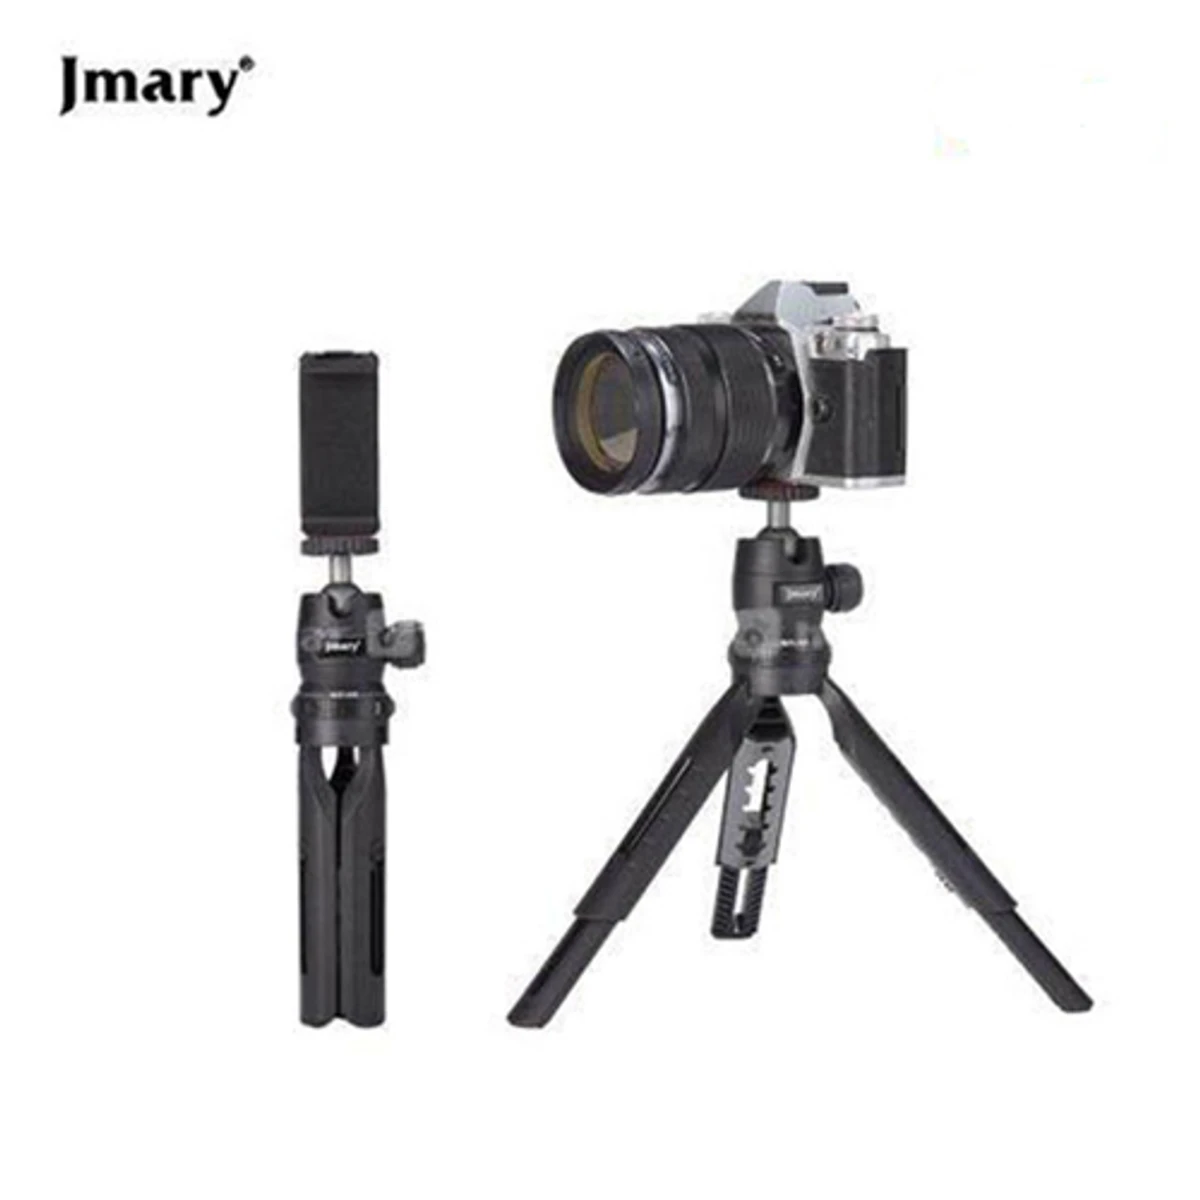 Jmary MT-27 Mini Tripod Stand With Mobile Holder